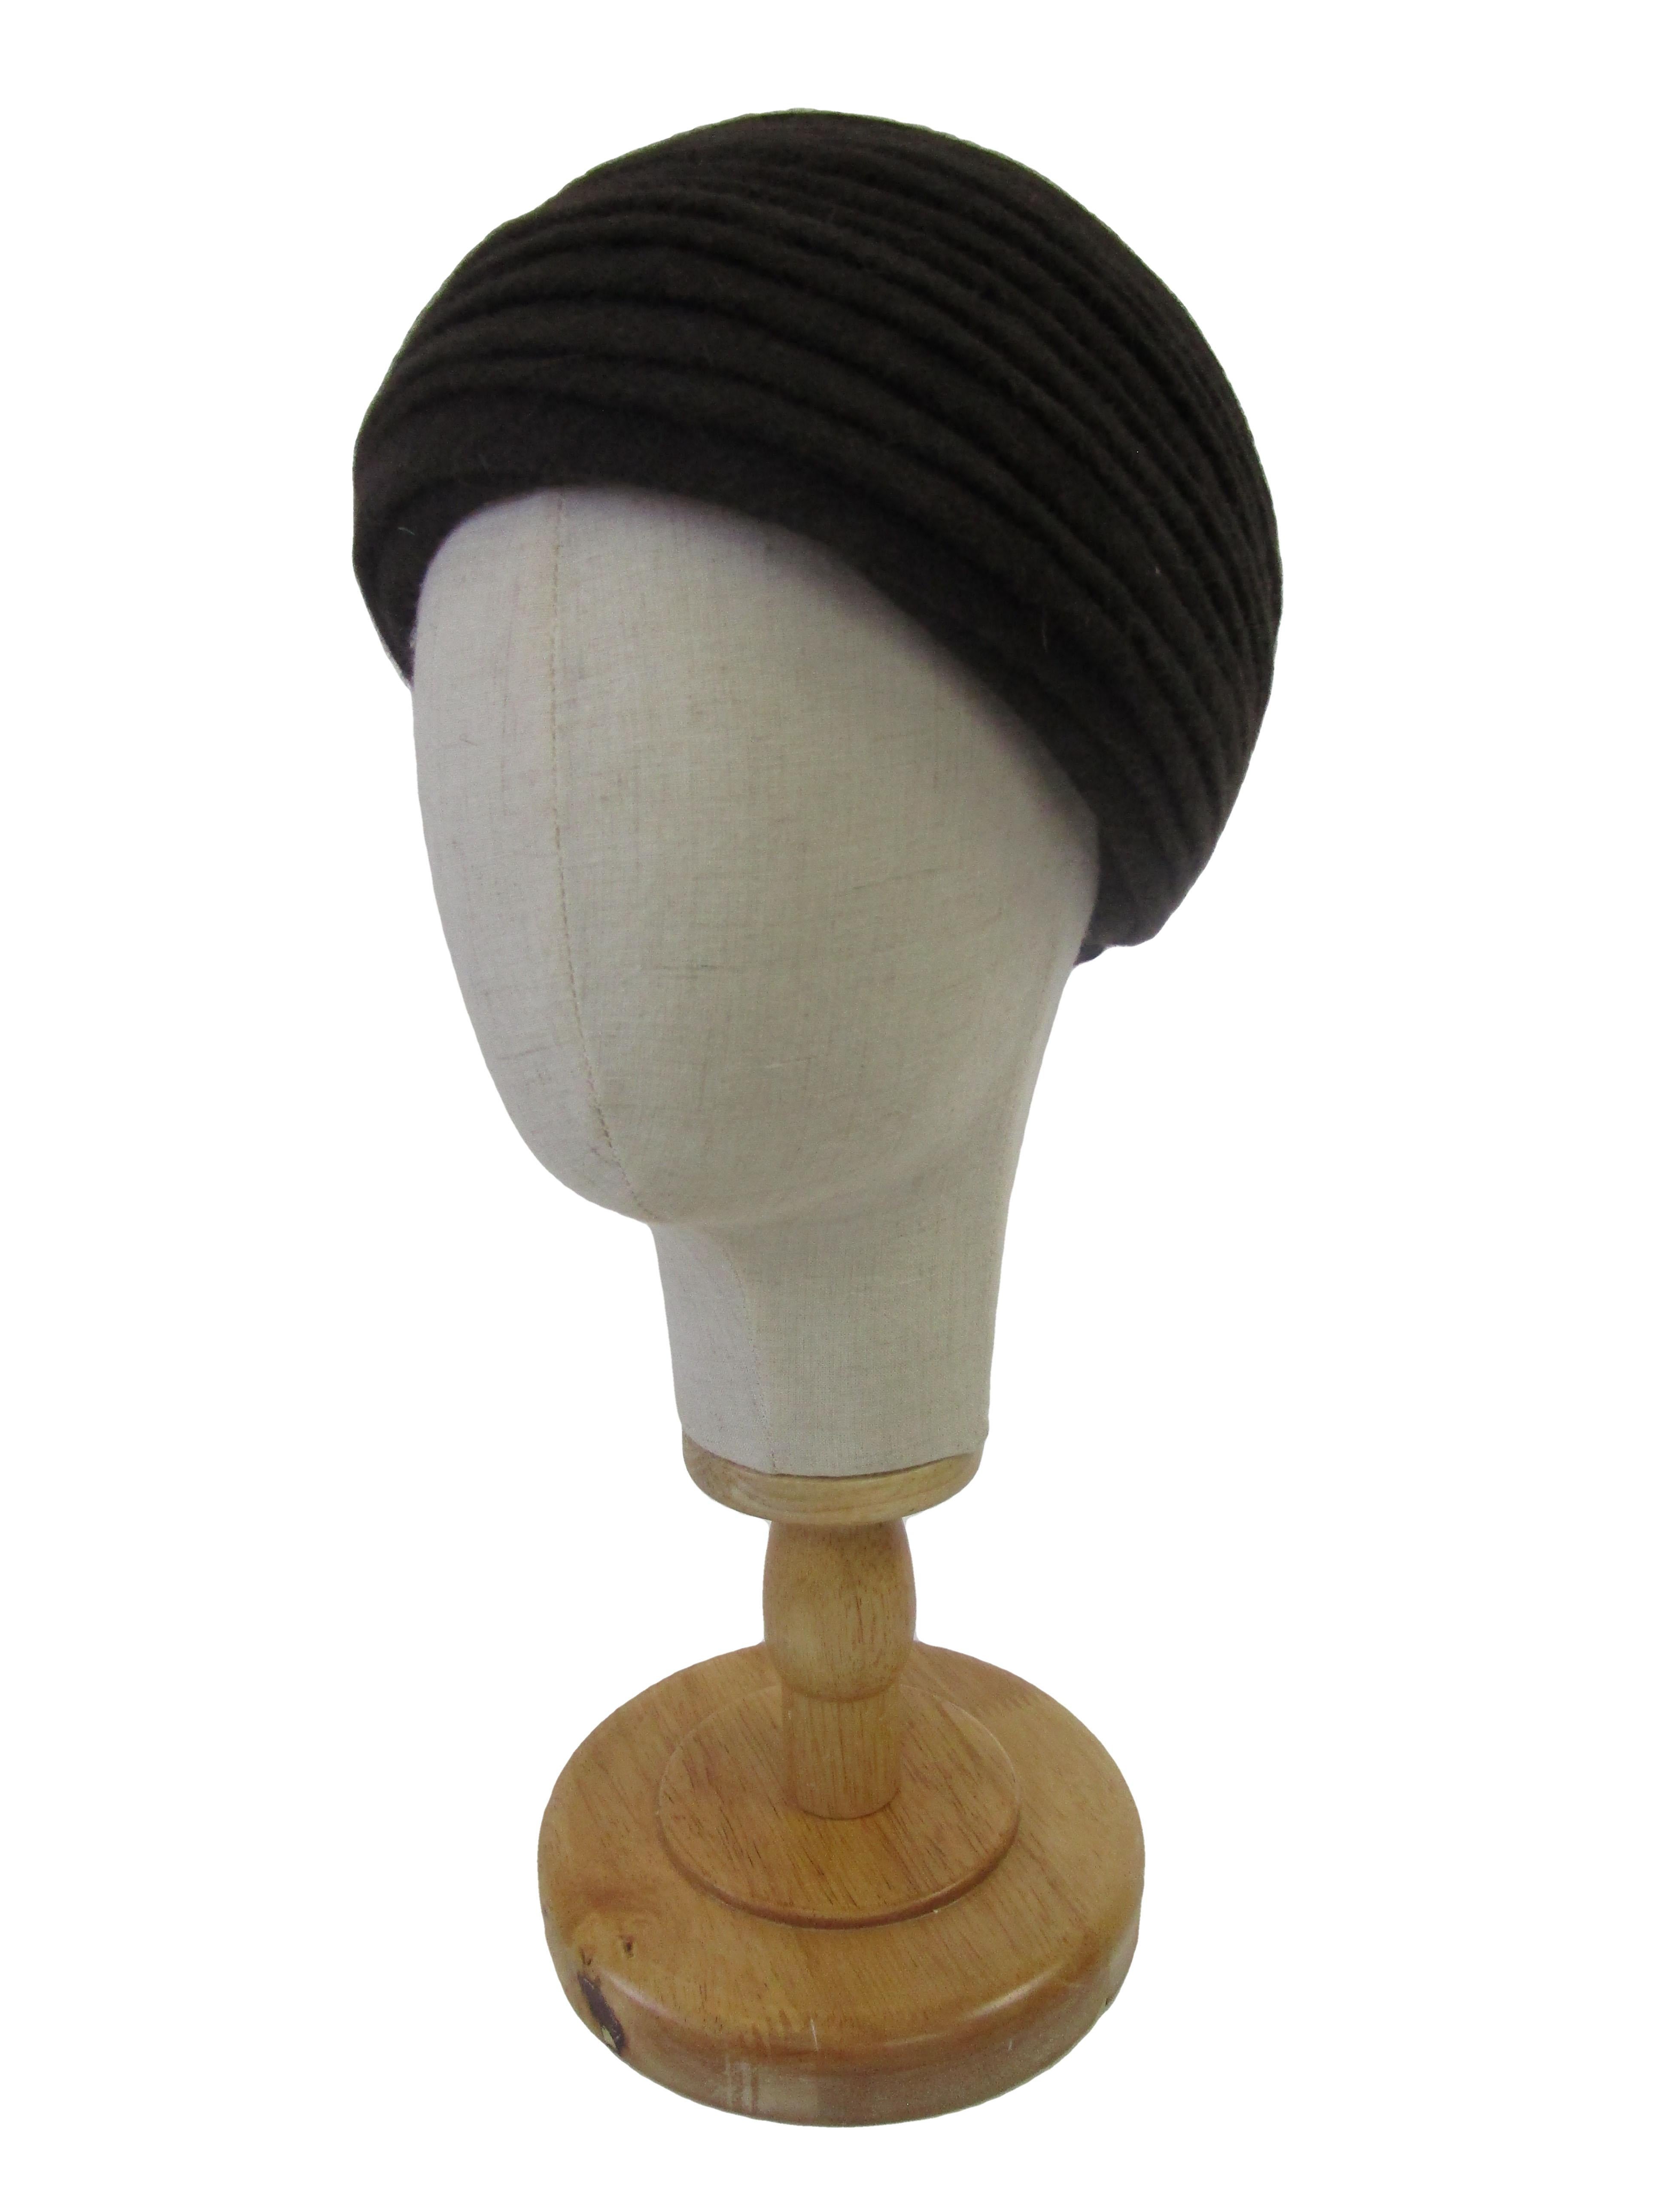 

Classic styled turban from Irene of New York!  This turban features a soft knitted fabric perfect for the fall and winter time. Hand stitched detailing and craftsmanship is found throughout with its folds that are tacked down by long strands of